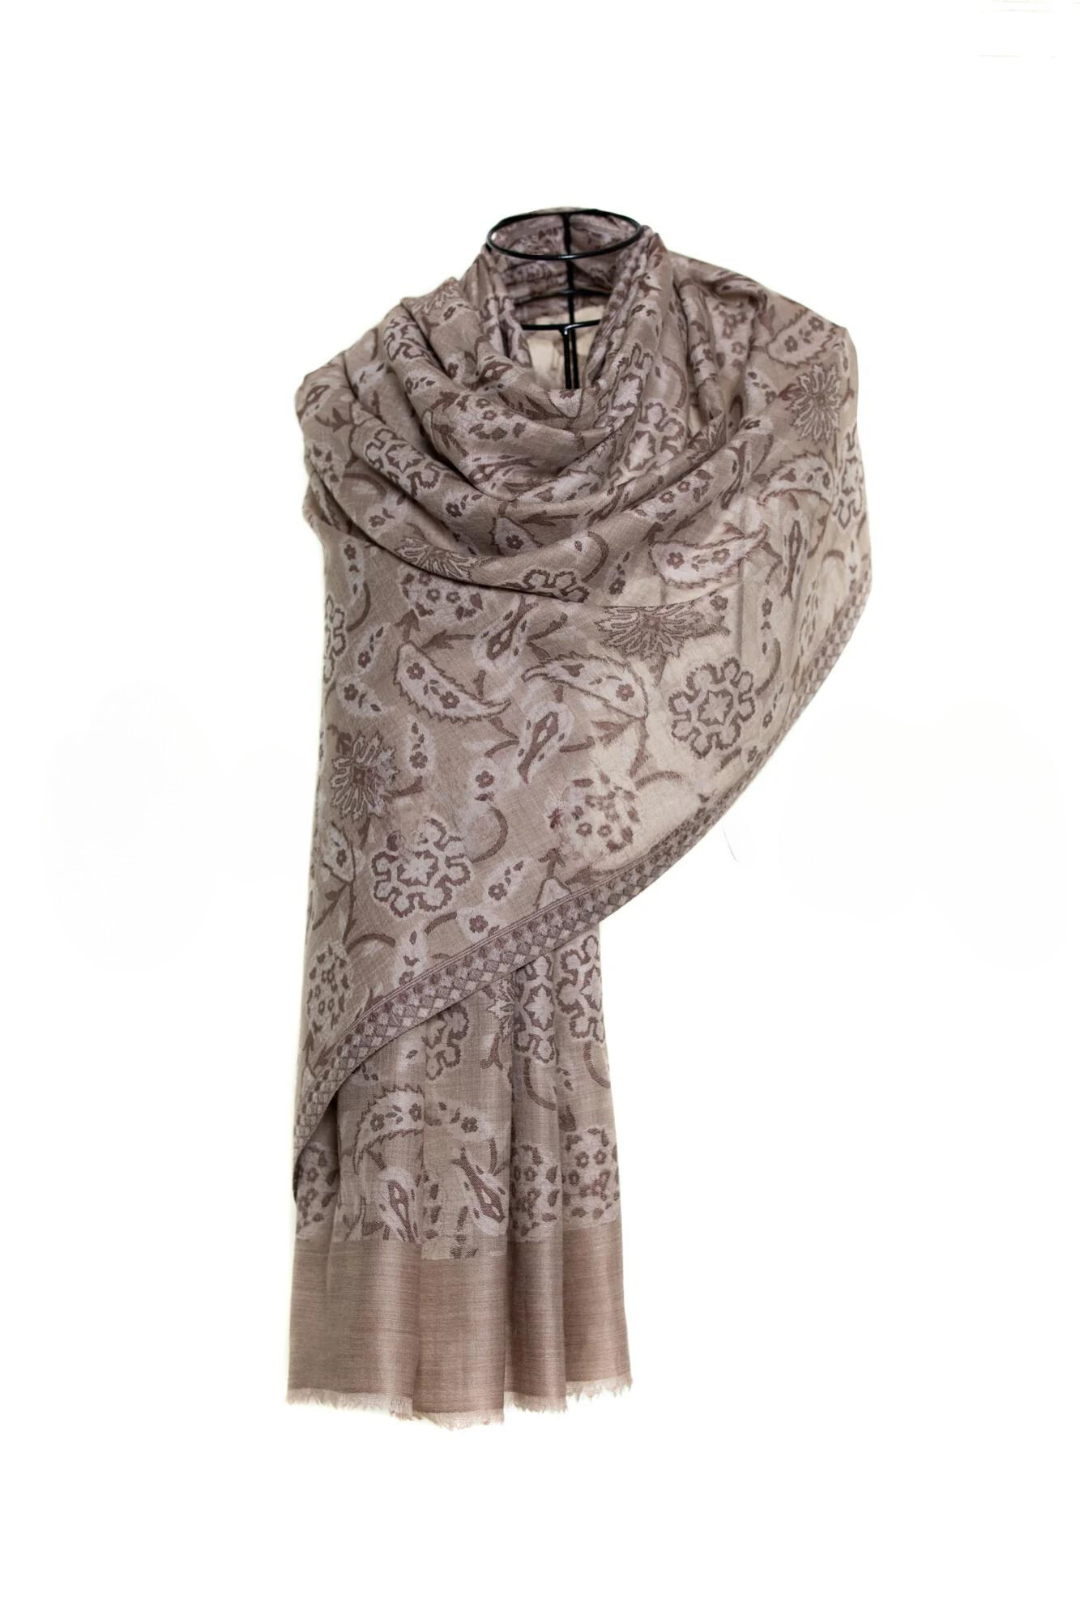 Abstract Floral Paisley Cashmere Pashmina Shawl - Natural Cream